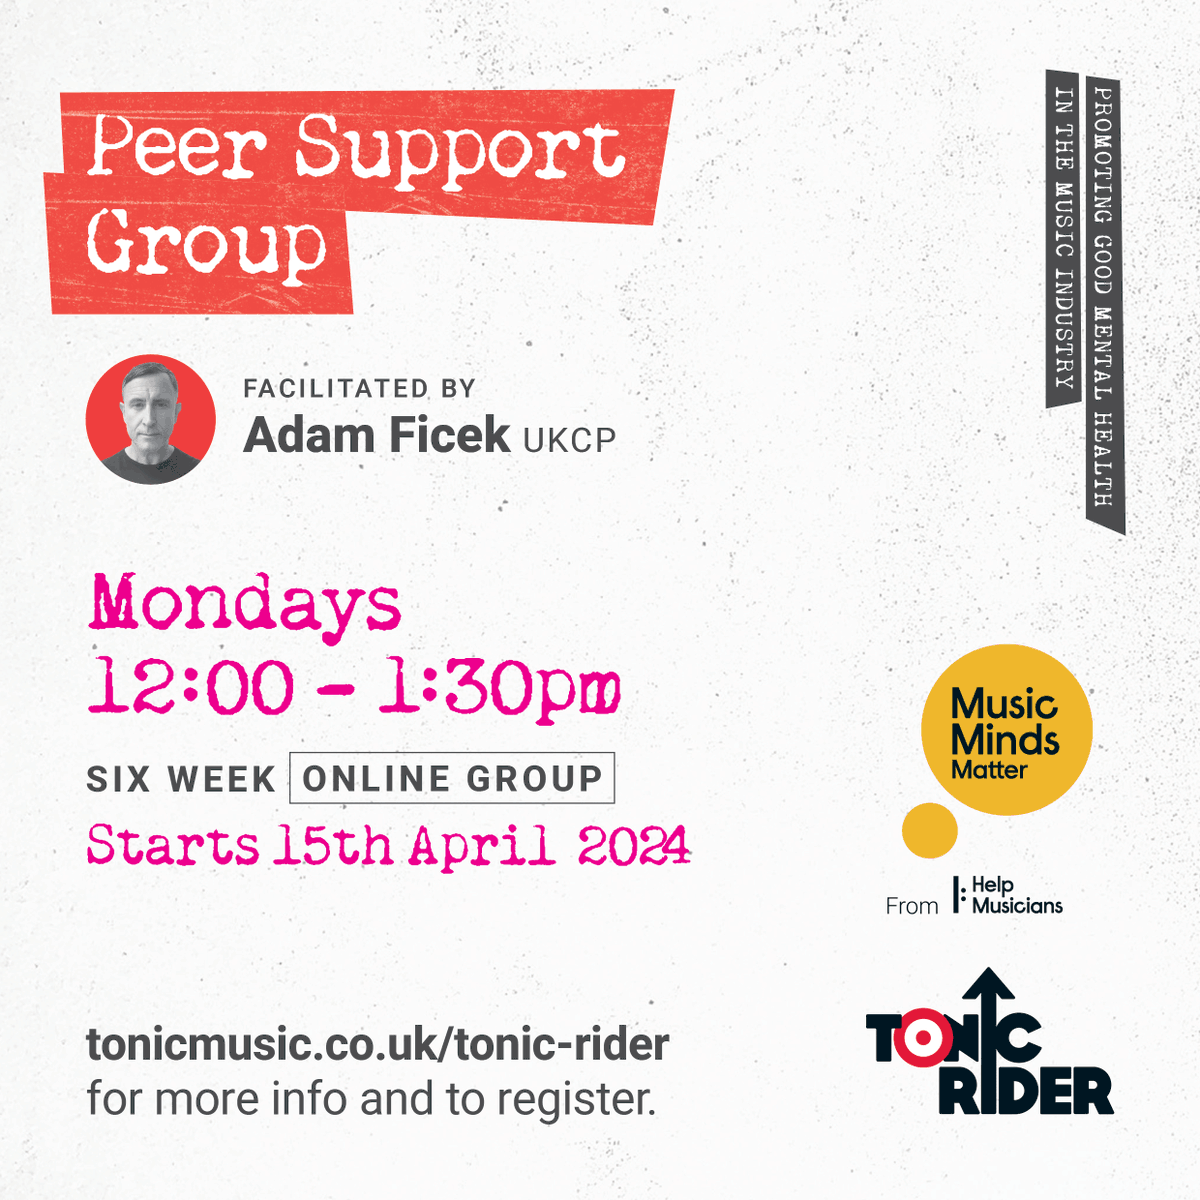 FREE to ALL artists, crew & industry professionals!      

Peer Support Group - in partnership with @helpmusicians

Starts Monday 15th April (12:00pm)

facilitated by @adamficek

To register > tonicmusic.co.uk/tonic-rider 

#TonicRider #MusicMindsMatter #MentalHealth #Wellbeing #Music